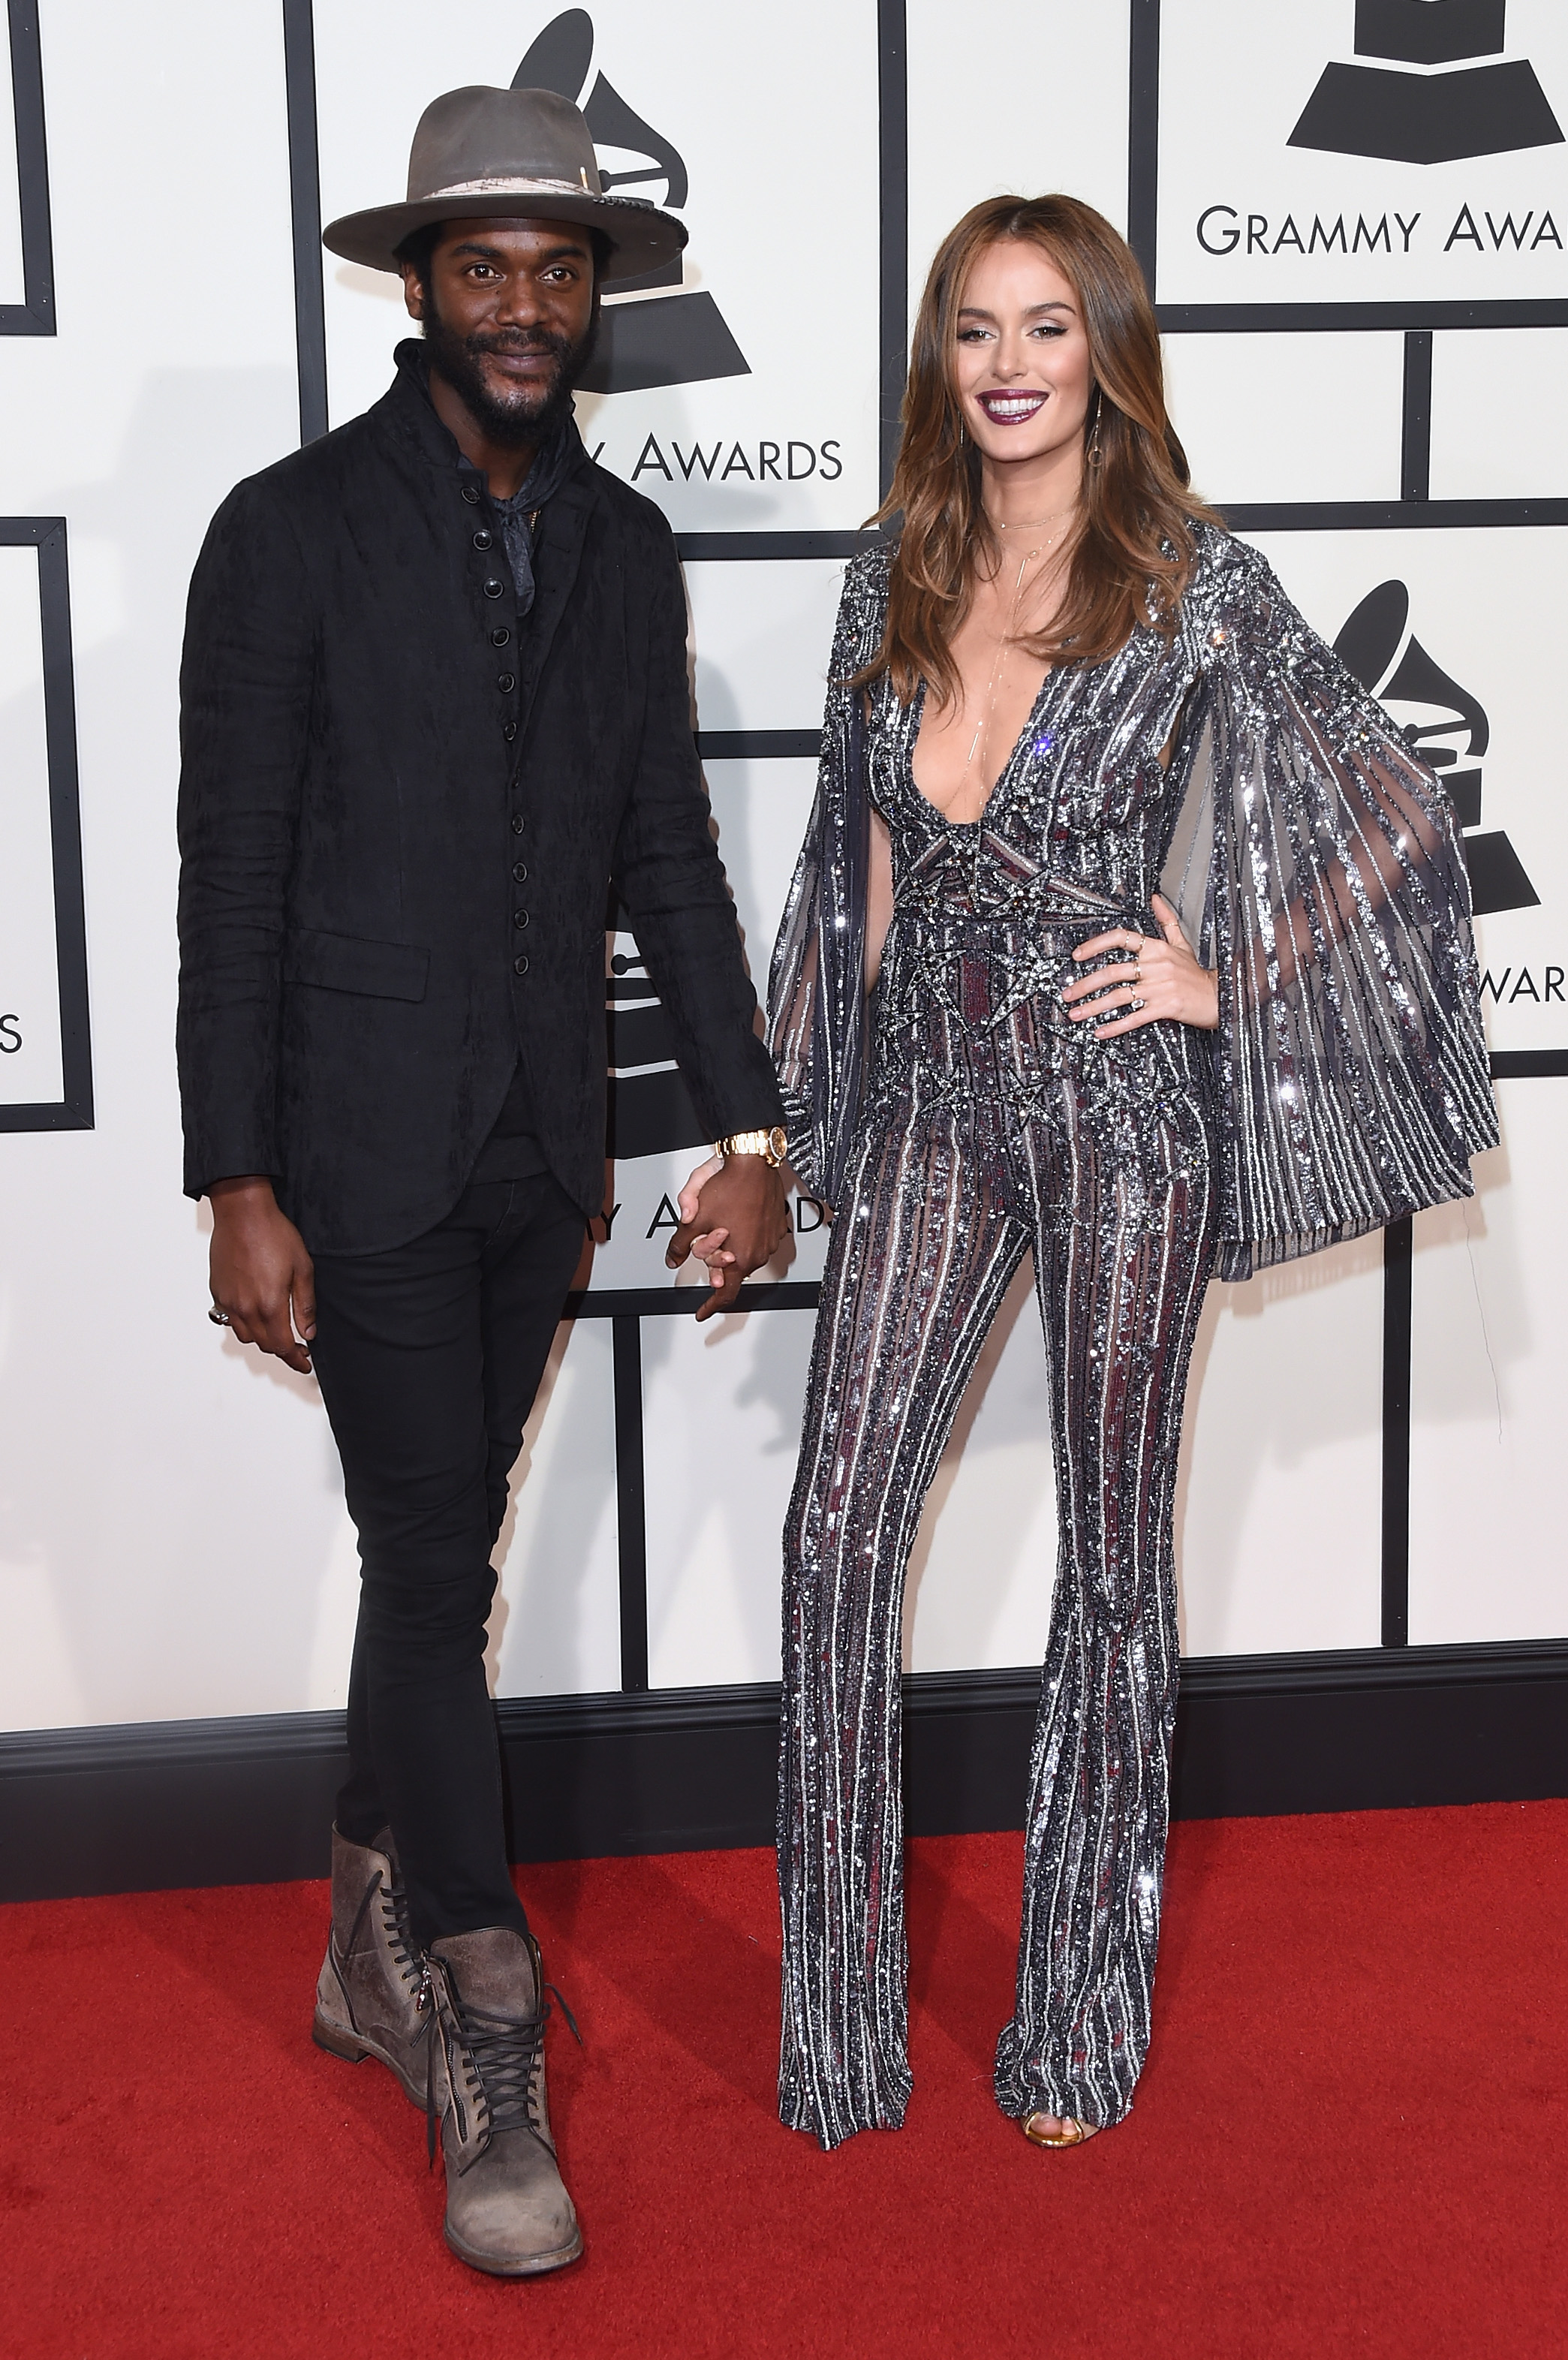 Gary Clark Jr., left, and Nicole Trunfio, right, attend the 58th GRAMMY Awards at Staples Center on Feb. 15, 2016 in Los Angeles.